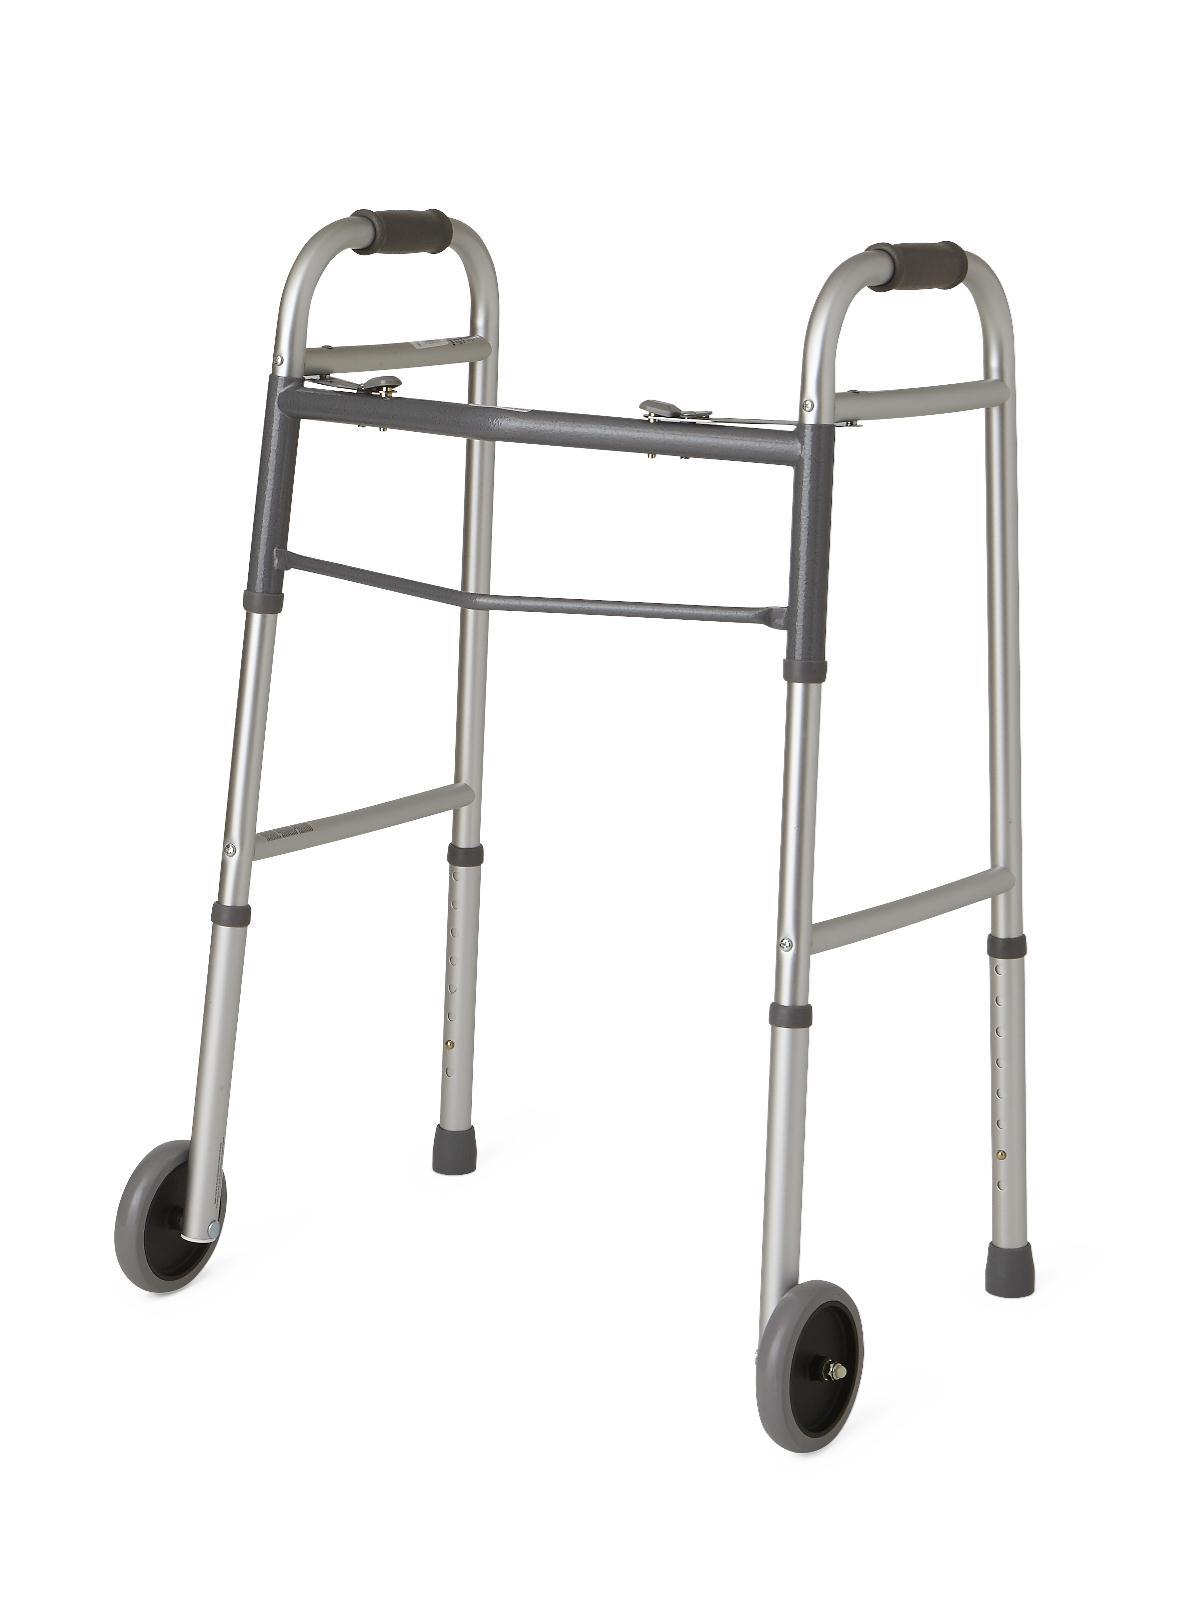 Rental Walker - Deluxe Folding, Two Button with 5" Wheels...starting at $30/month - BC MedEquip